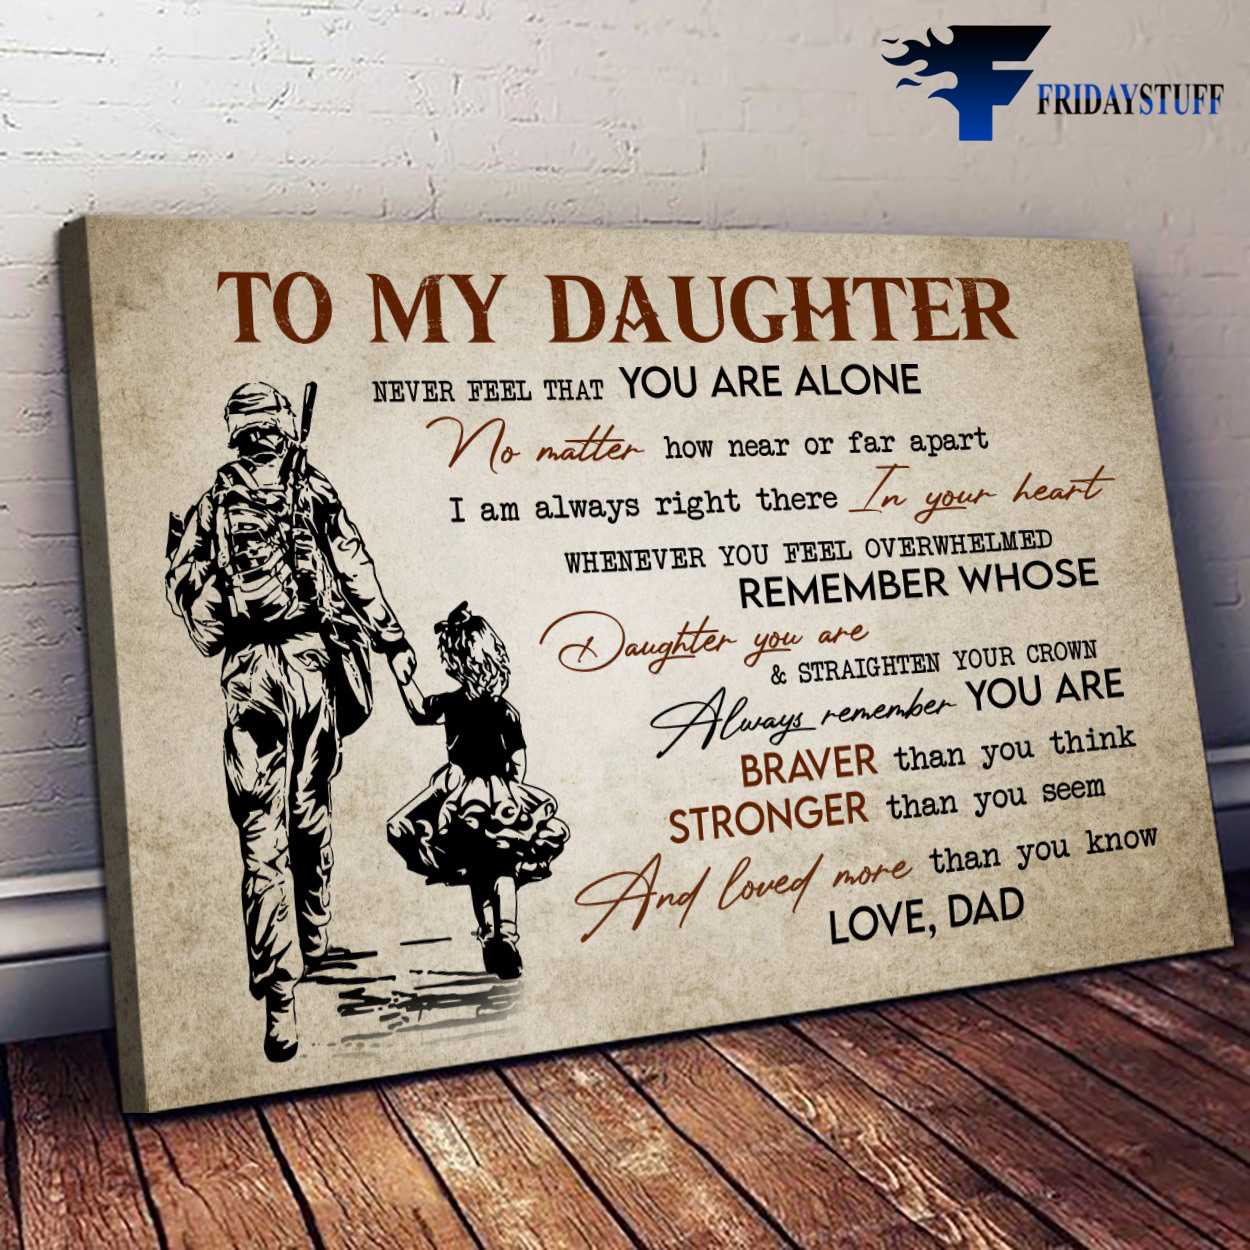 Soldier Poster, Dad And Daughter, Never Feel That You Are Alone, No Matter How Near Or Far Apart, I Am Always Right There In Your Heart